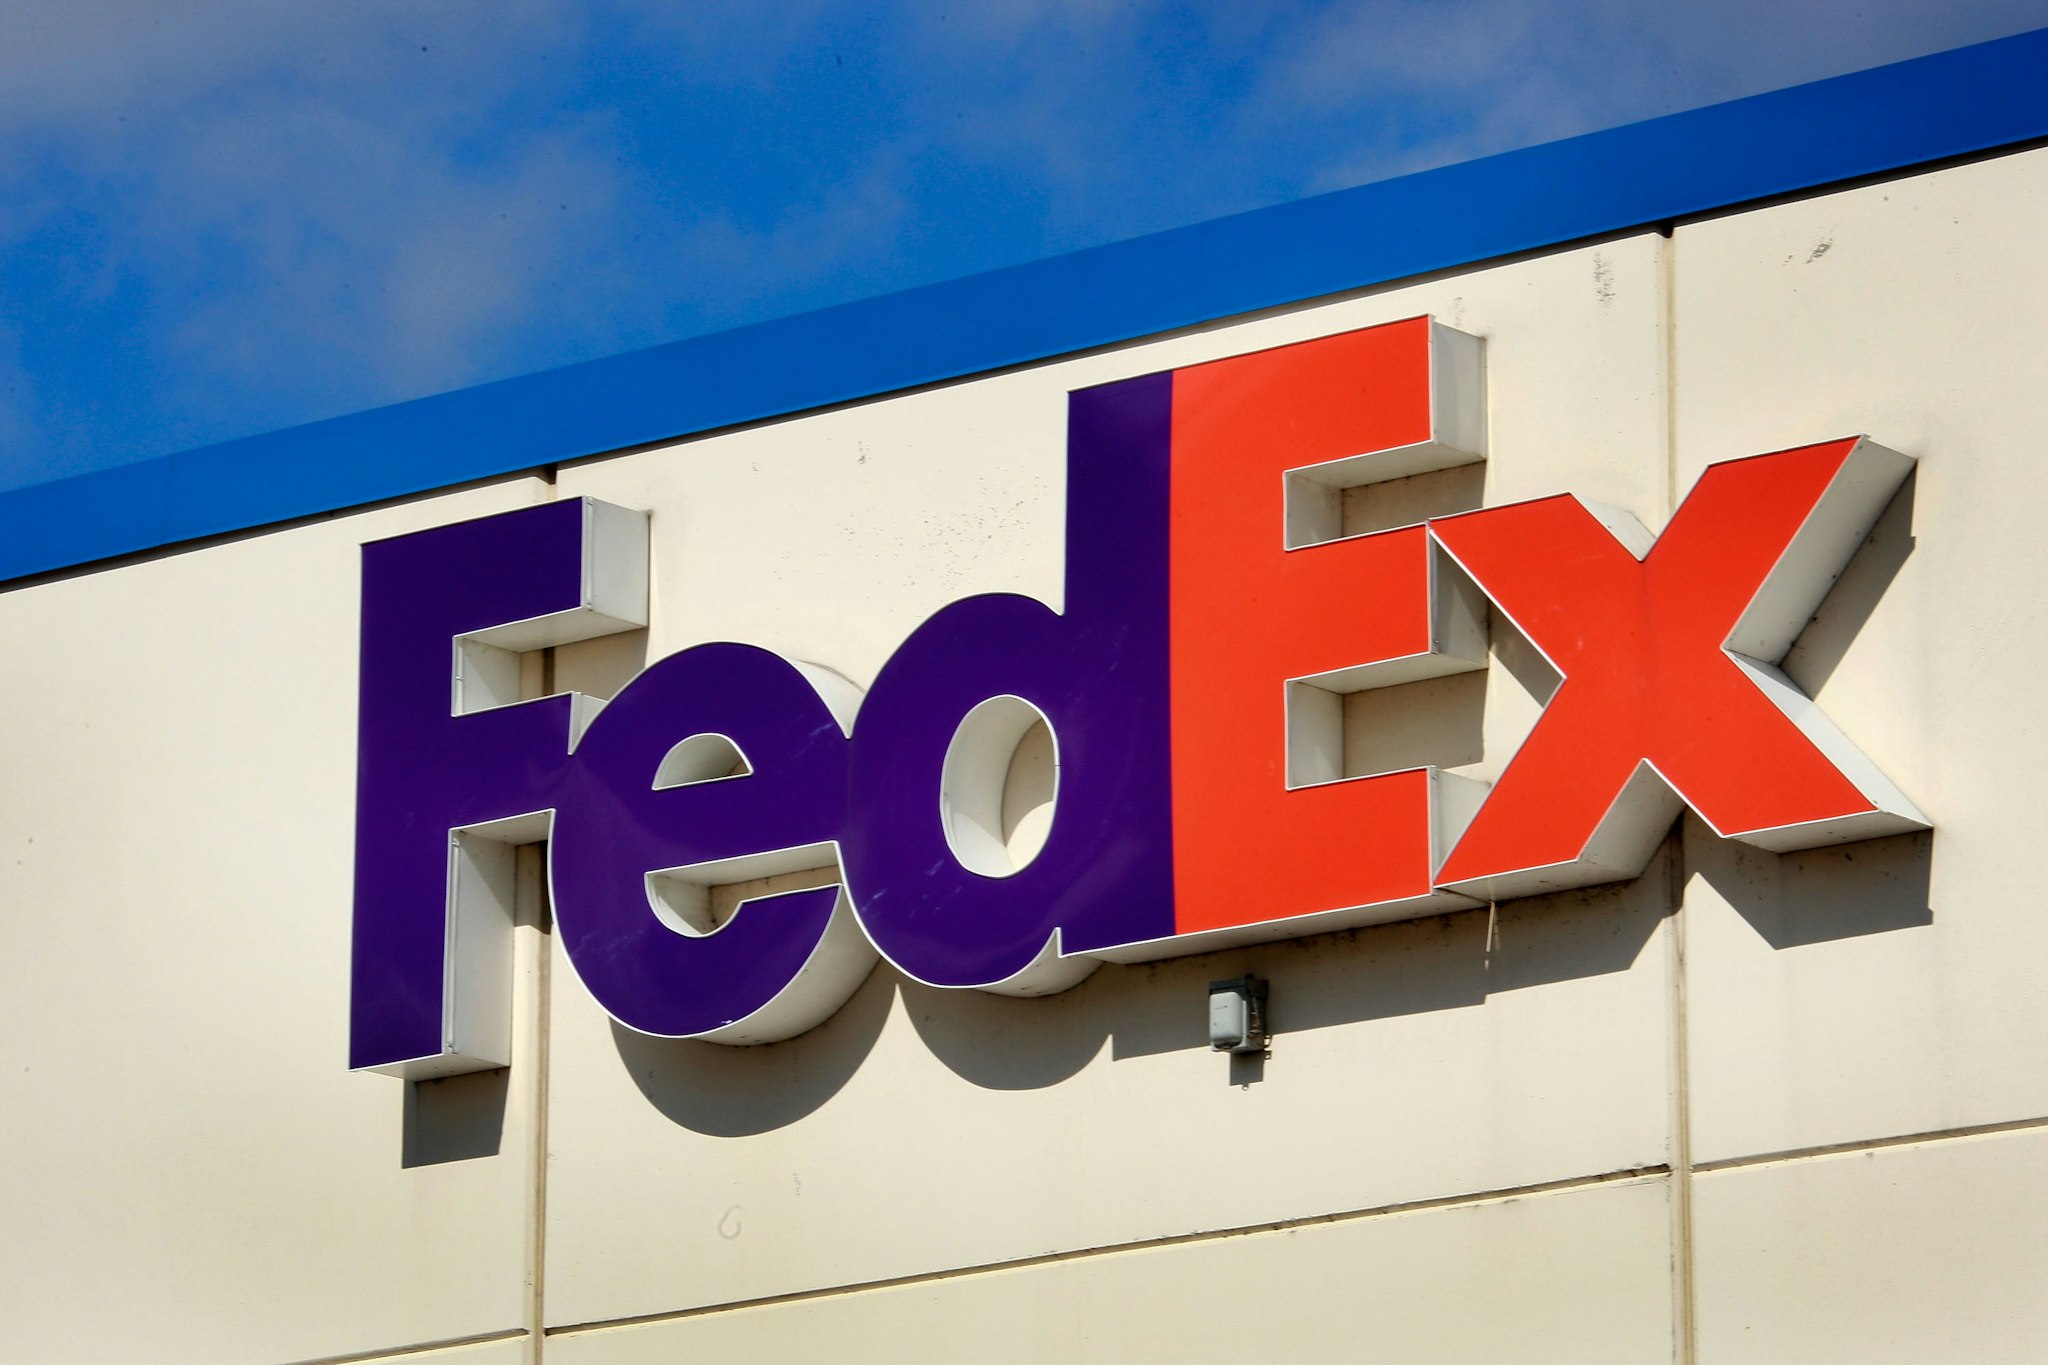 CHICAGO - MARCH 19: A FedEx logo marks the location of one of the company's distribution center March 19, 2009 in Chicago, Illinois. After seeing its third-quarter net income plunge 75 percent the company said it plans to cut $1 billion of costs in the coming year.